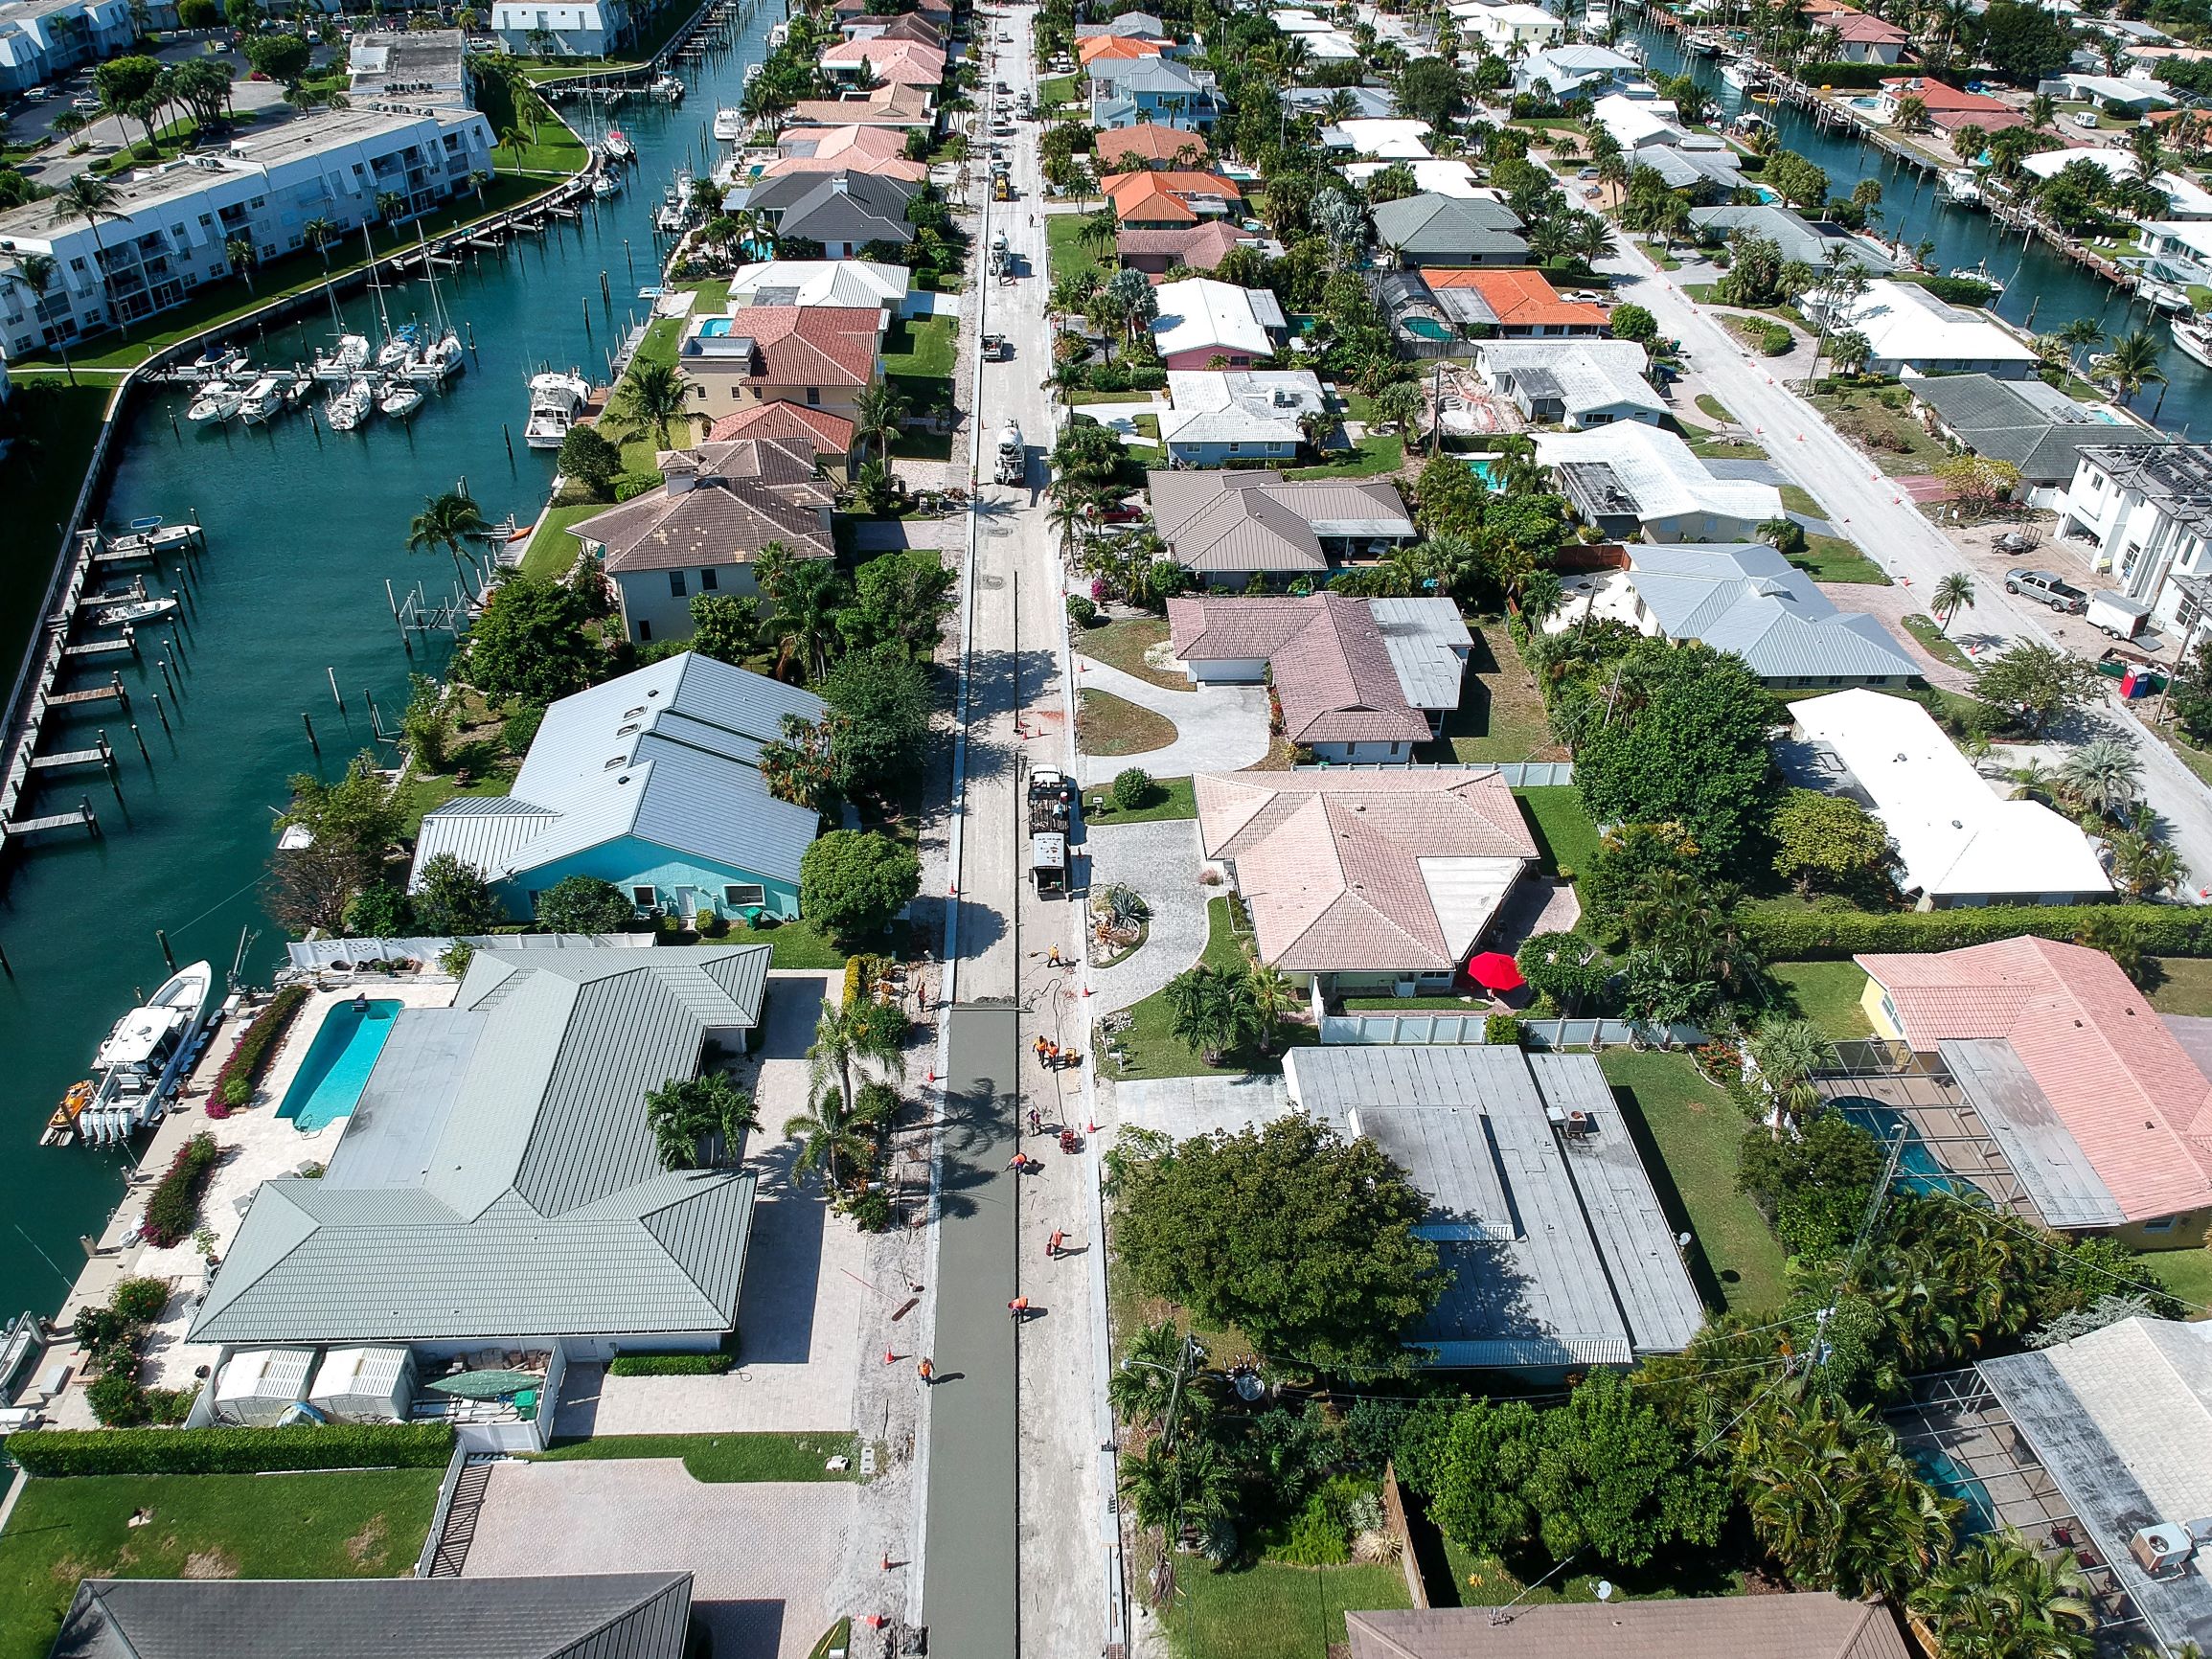 Workers repave the roads with concrete in the neighborhood of Yacht Harbor Manor as part of the recent Singer Island Neighborhood Improvement Project.